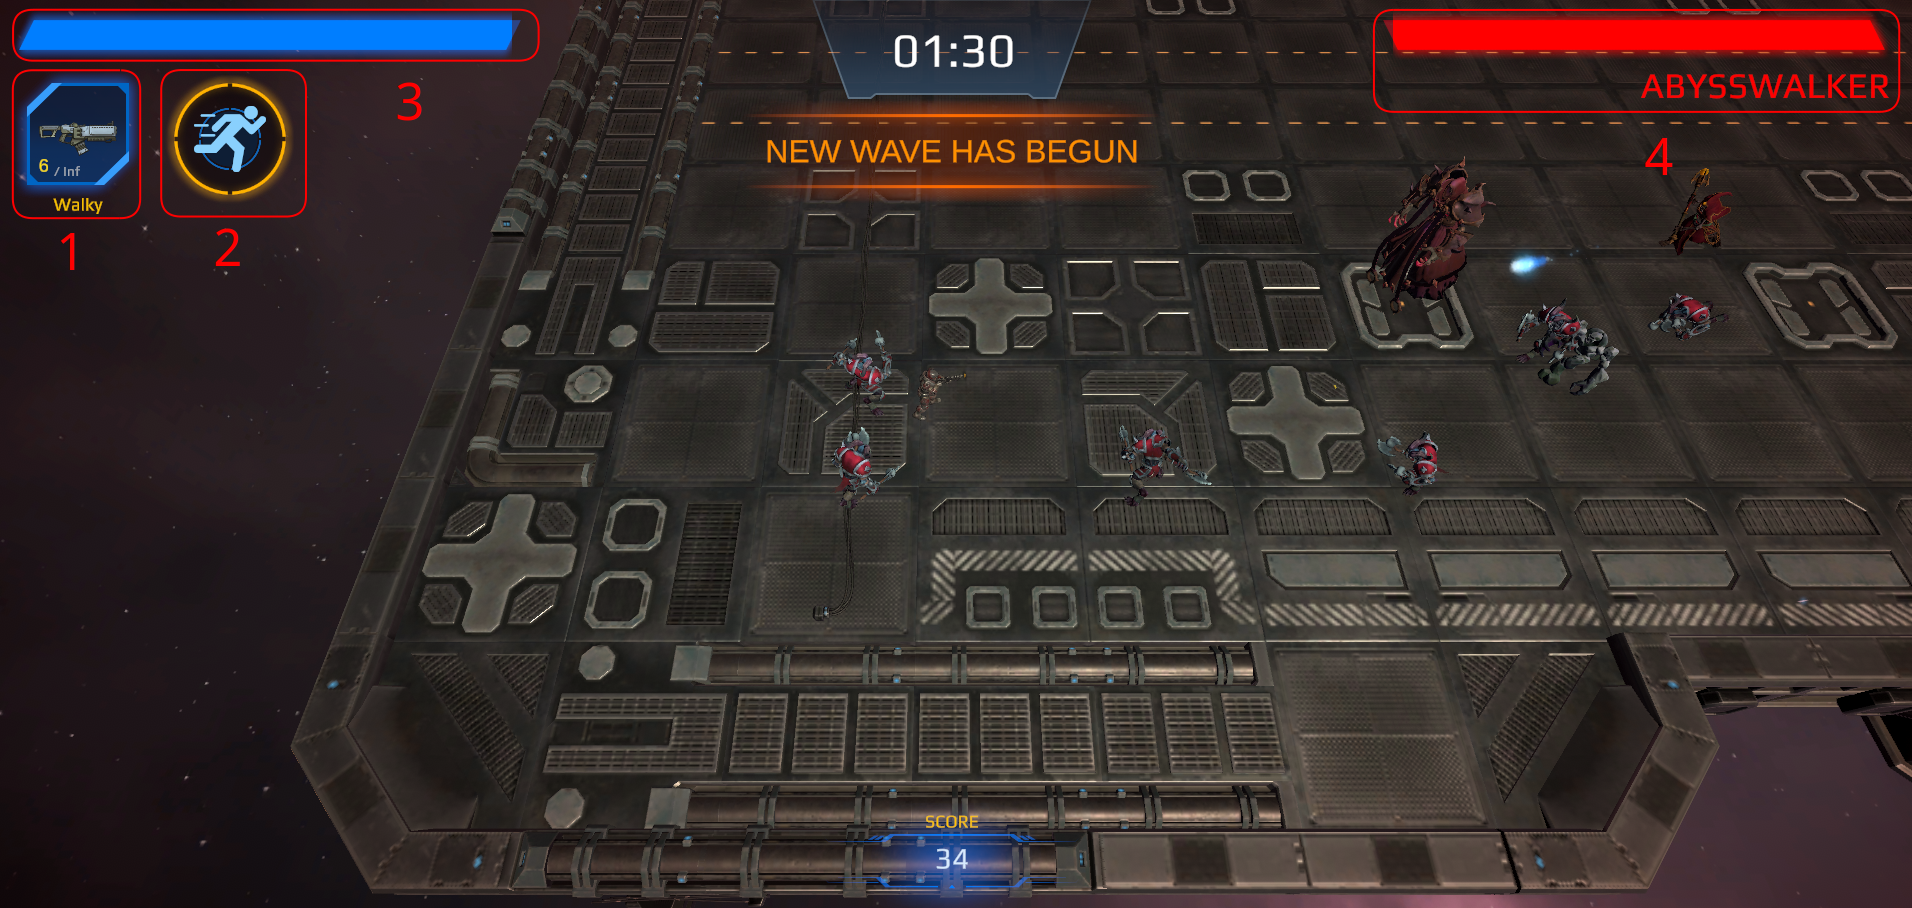 A screenshot from within the game interface